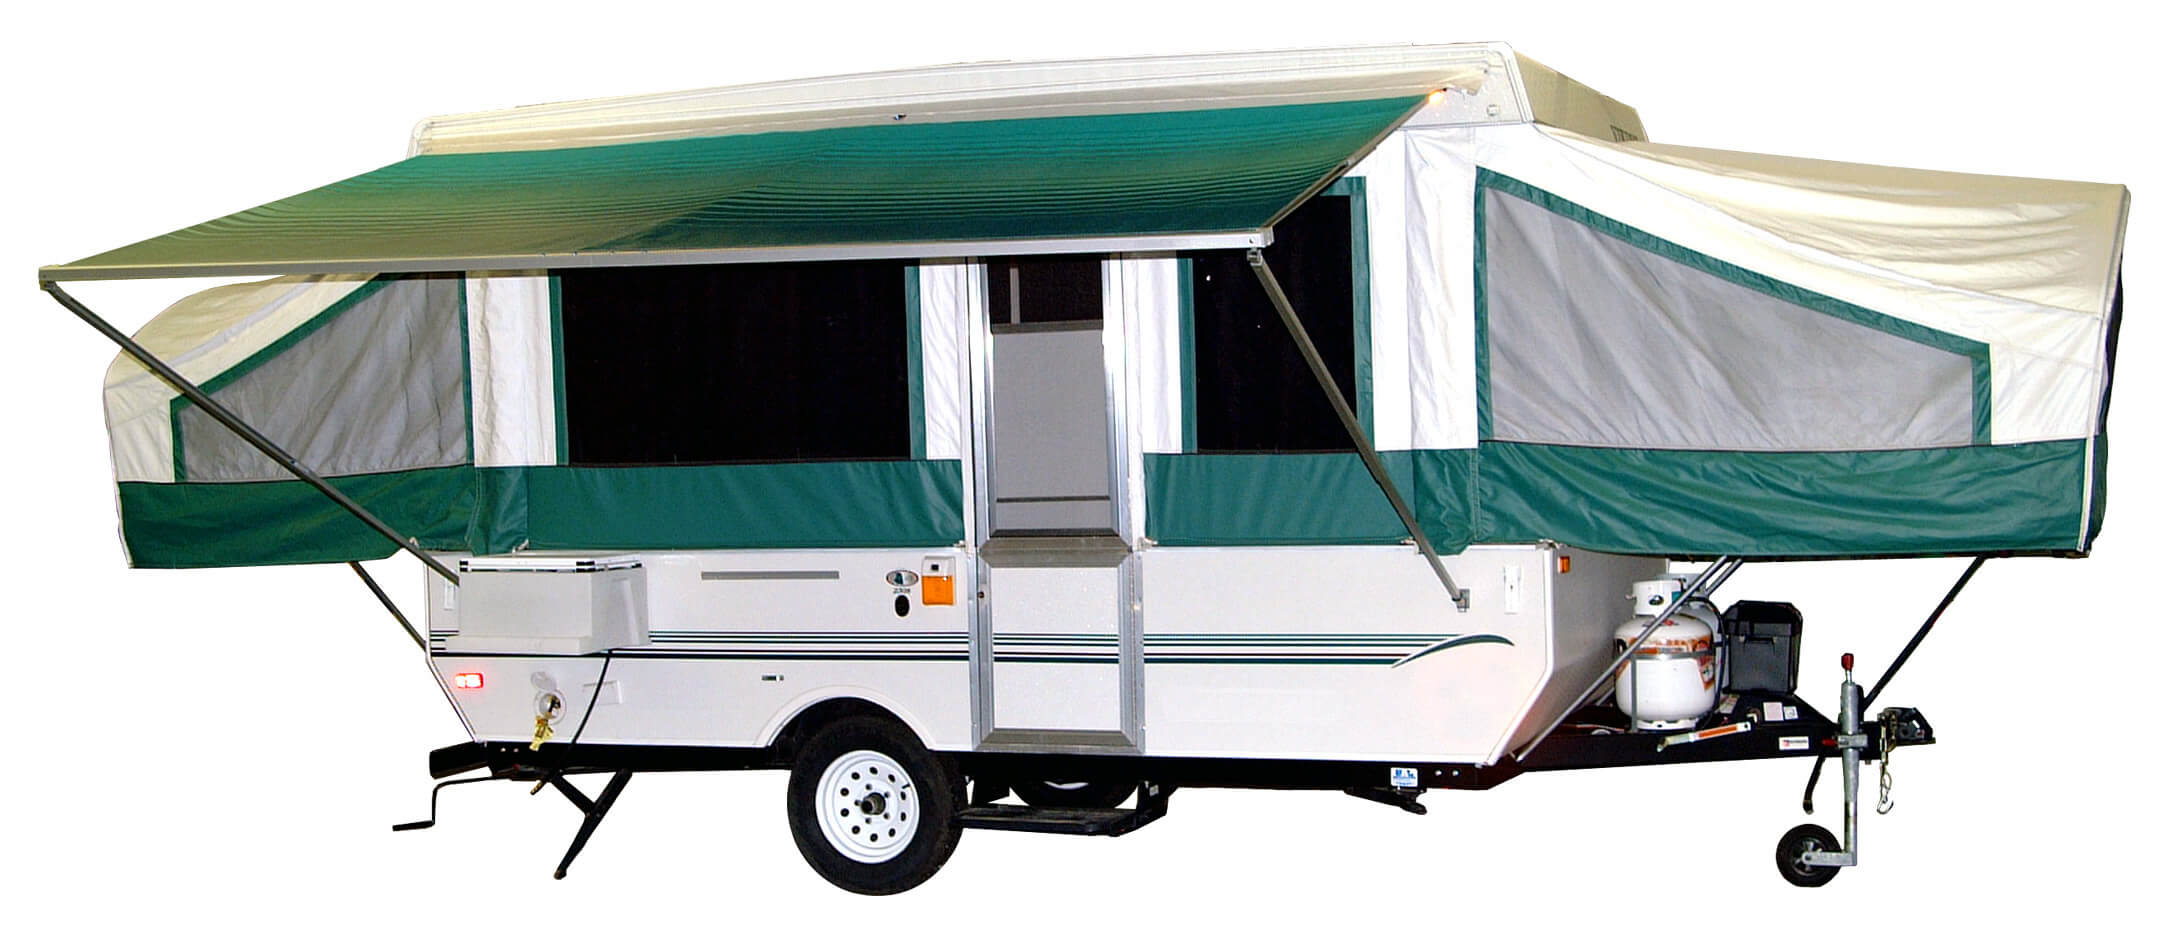 Does A Pop Up Camper Need Insurance